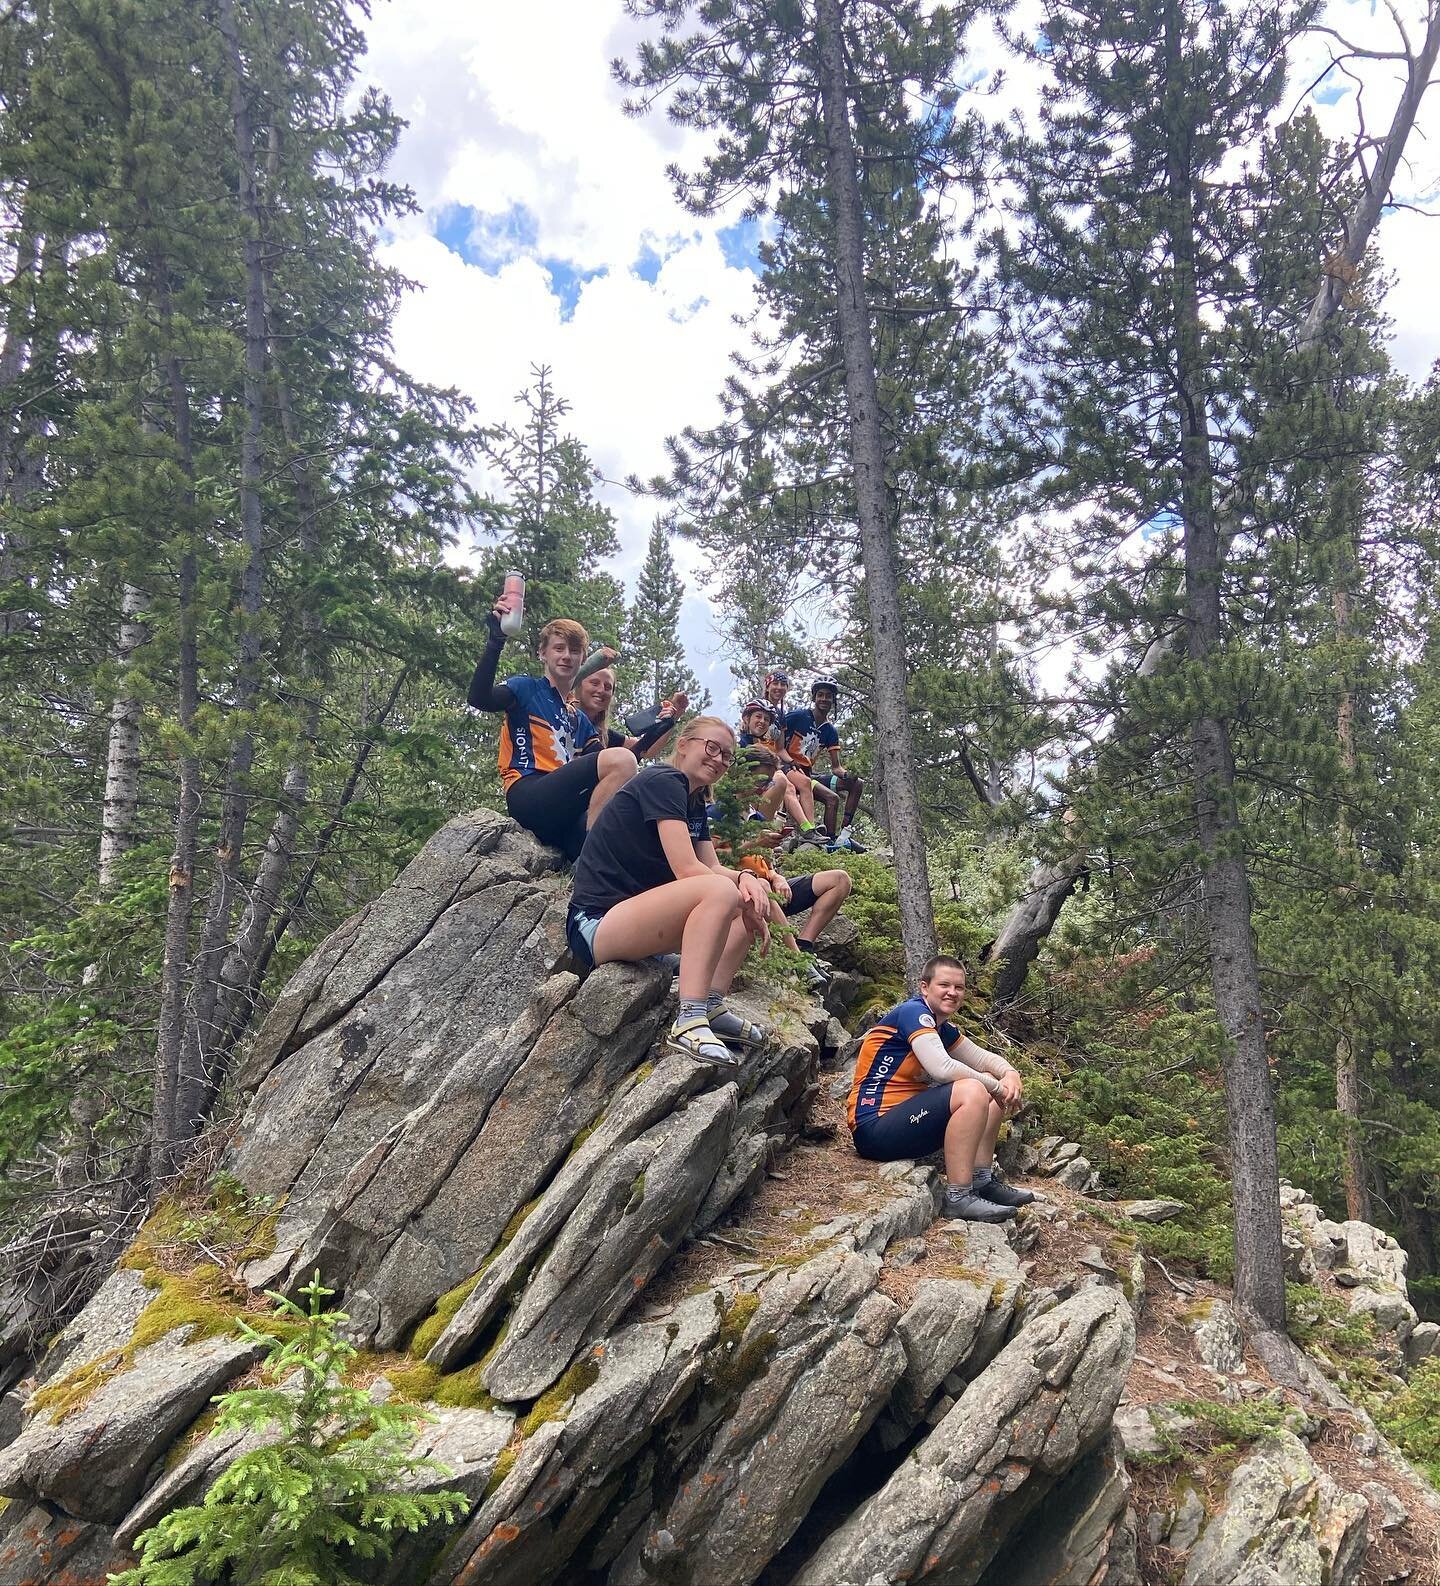 Day 44: We spent our Fourth of July biking up Bighorn Mountains! Once we made it to Meadowlark Lake we camped out for the night and celebrated by eating a ton of watermelon! 🇺🇸🏕🍉
**Follow our team blog below**
http://illini4000.org/journals
.
.
.